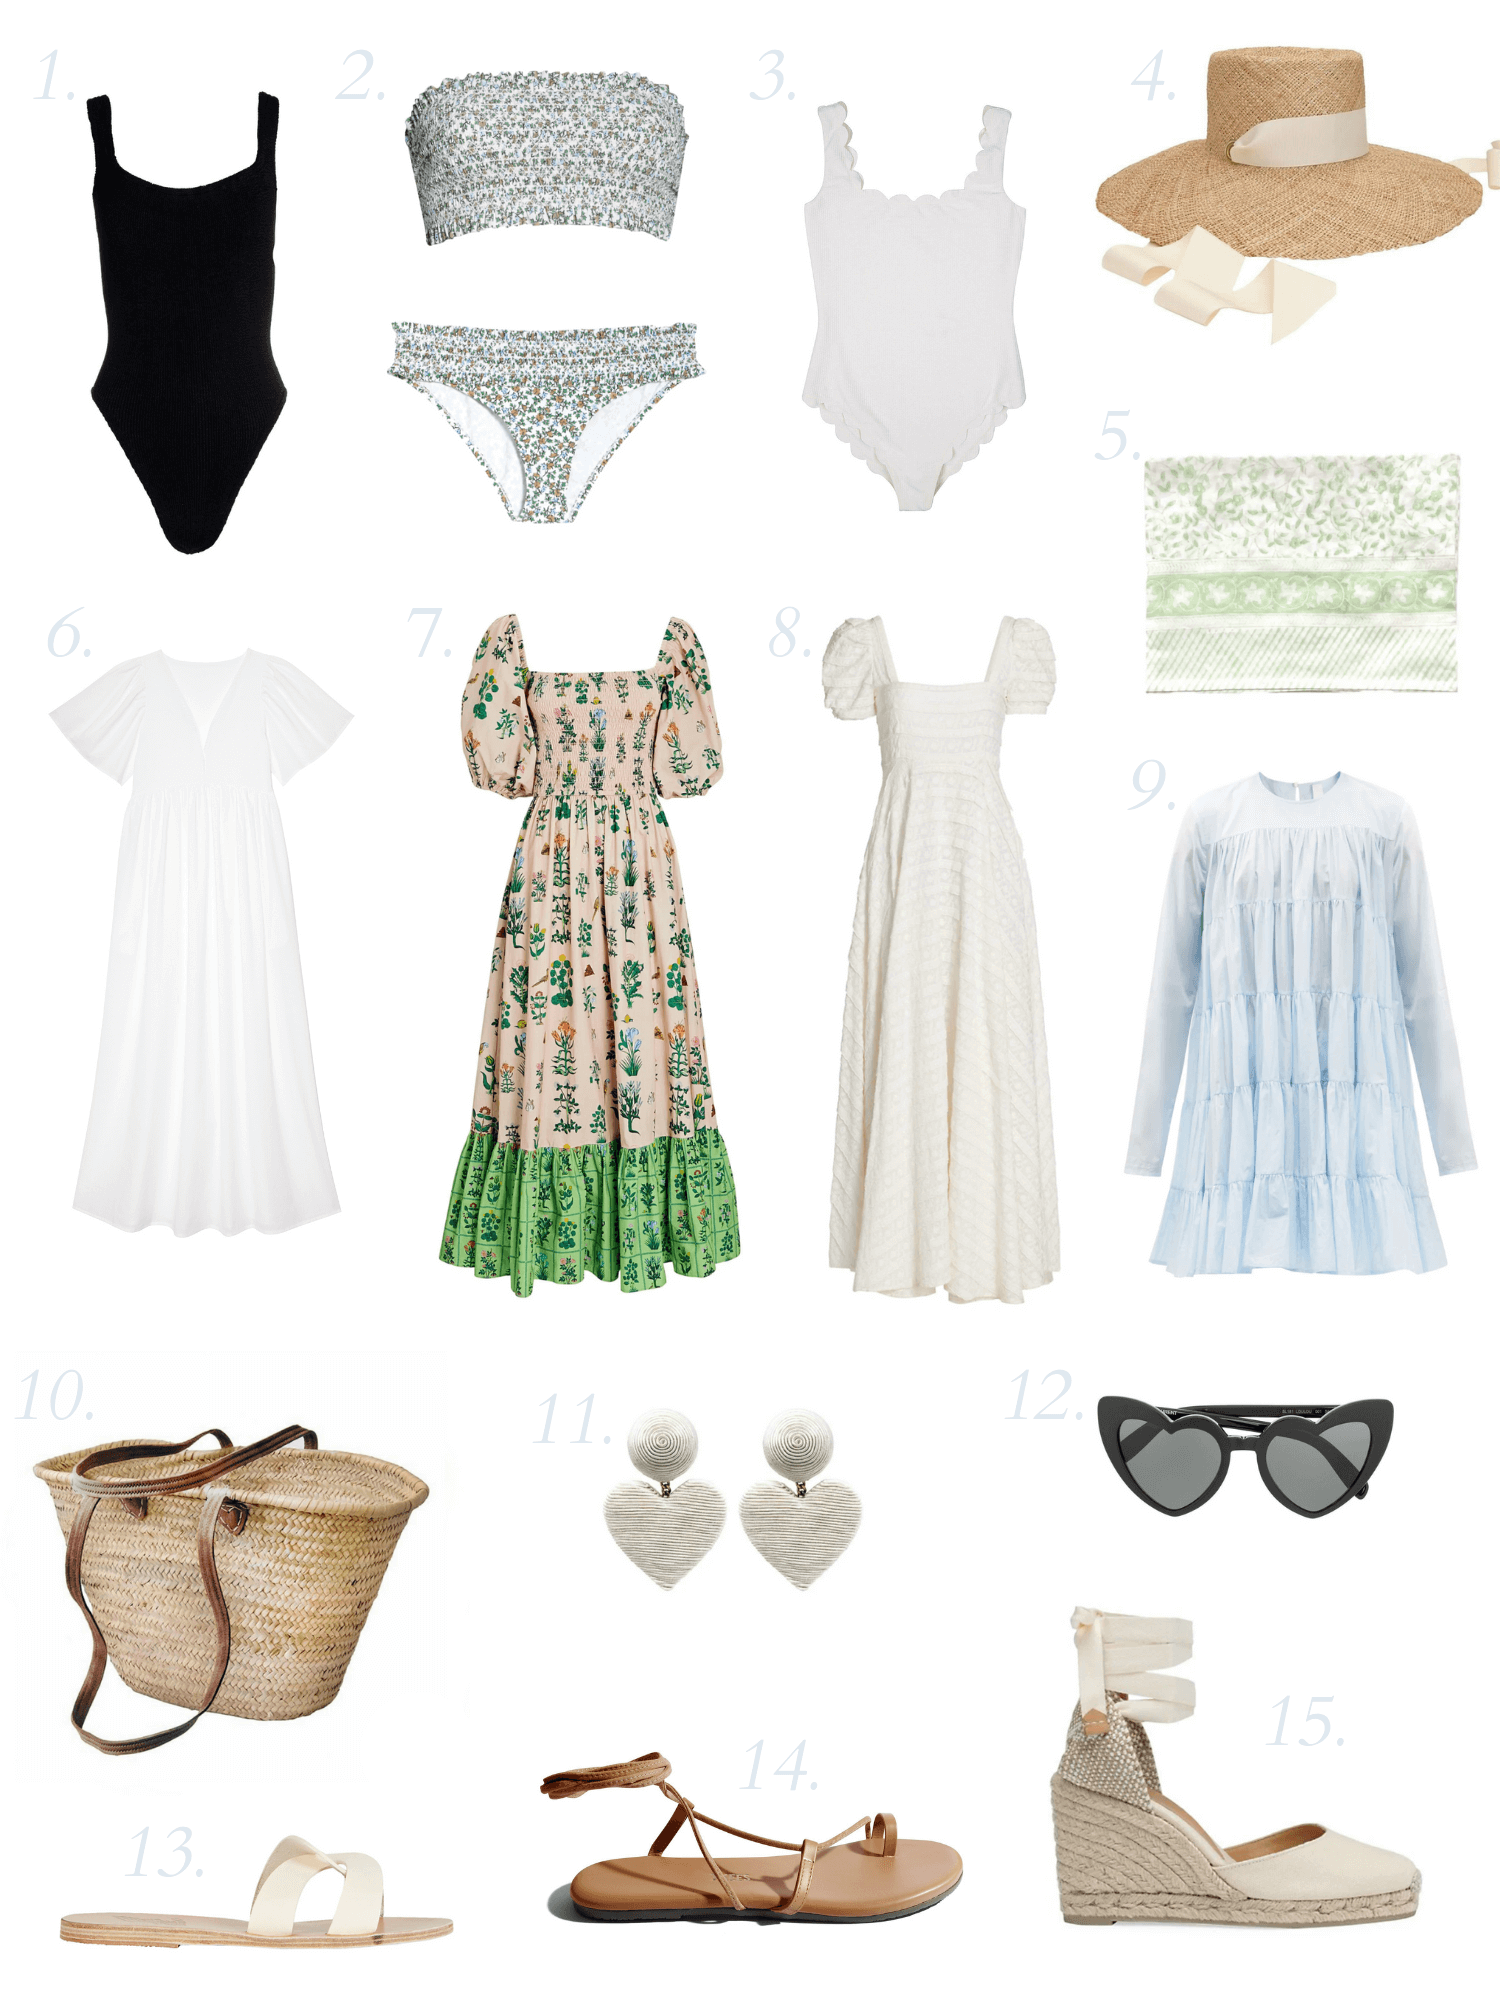 How to Pack a Travel Capsule Wardrobe for Summer - Journal